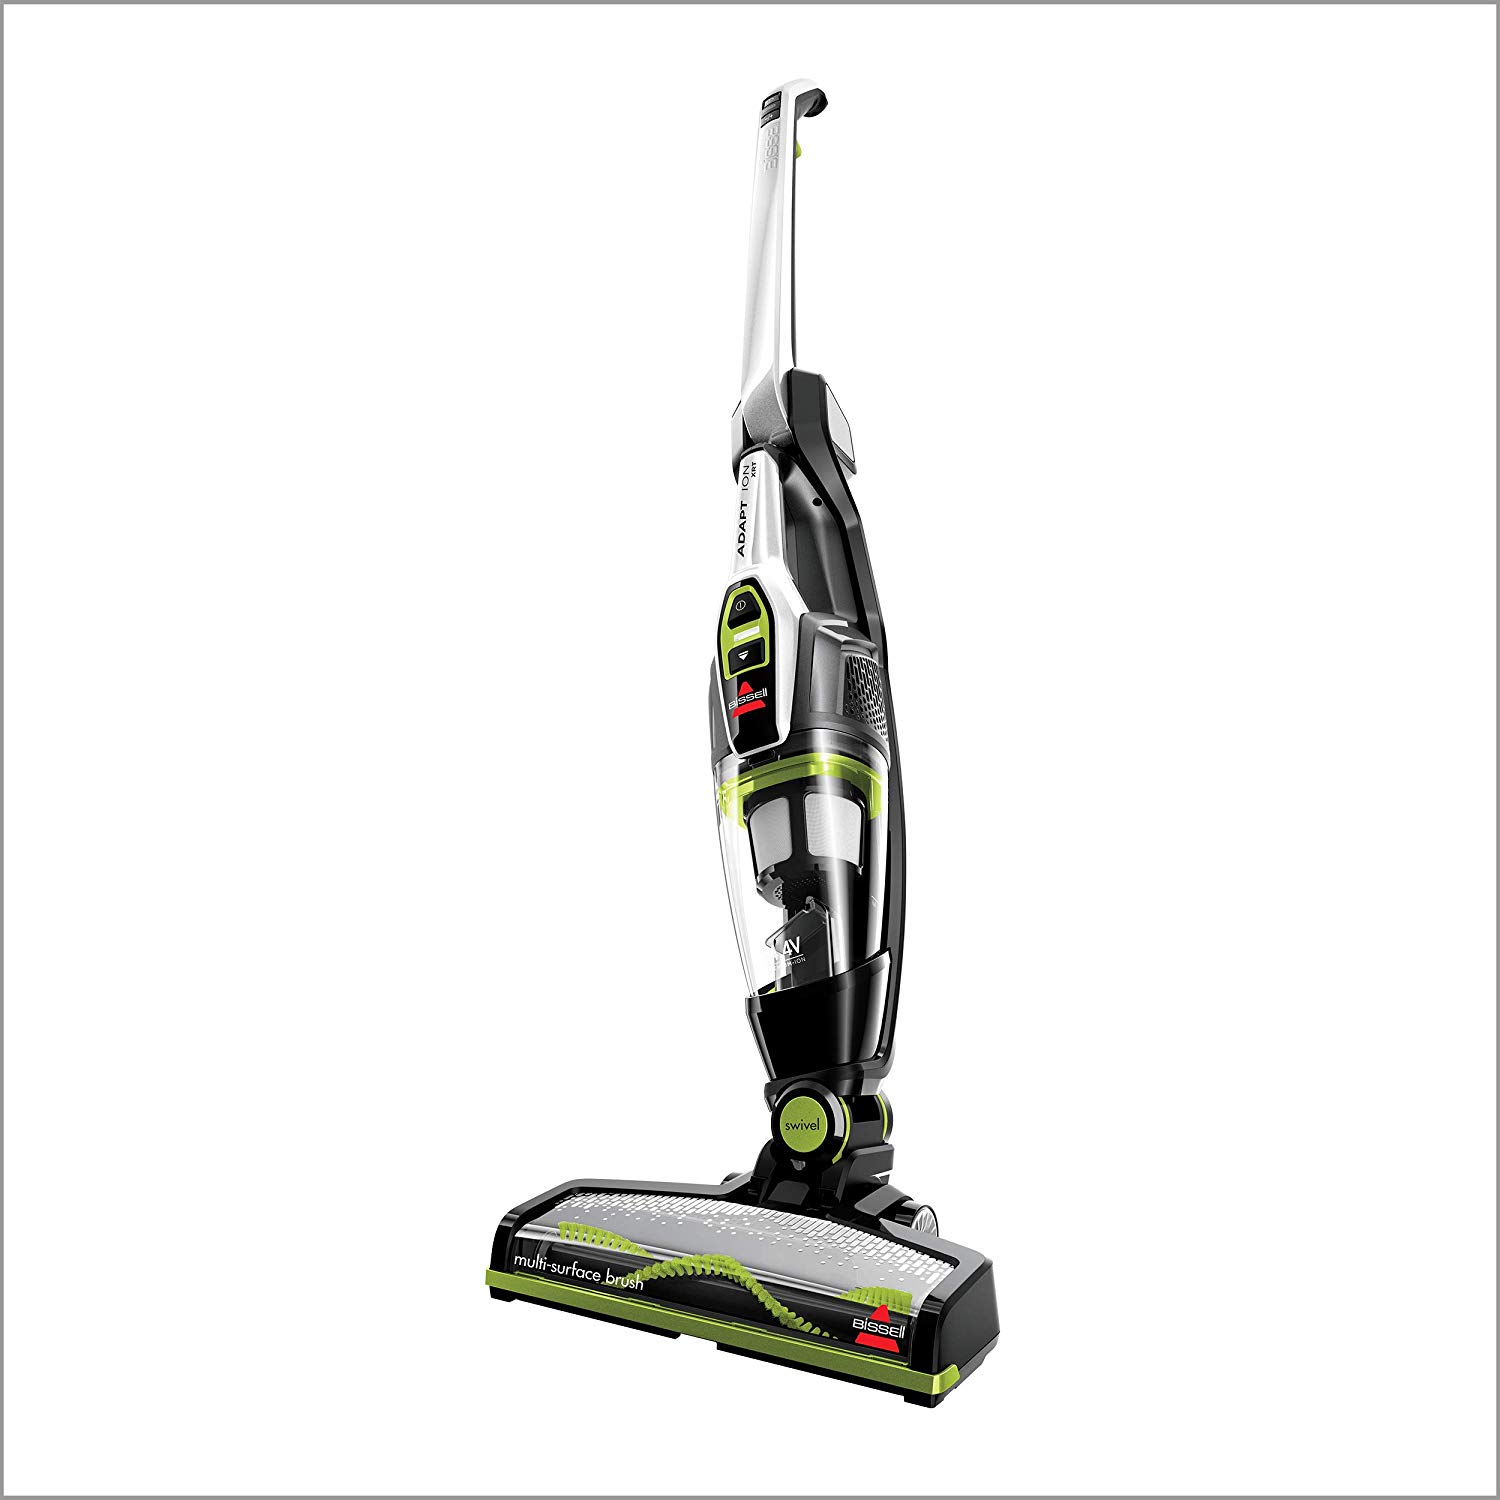 Bissell 2387 Adapt XRT Pet 14.4V Lithium Ion Cordless Stick Vacuum Cleaner, Green, 2387 - image 5 of 7